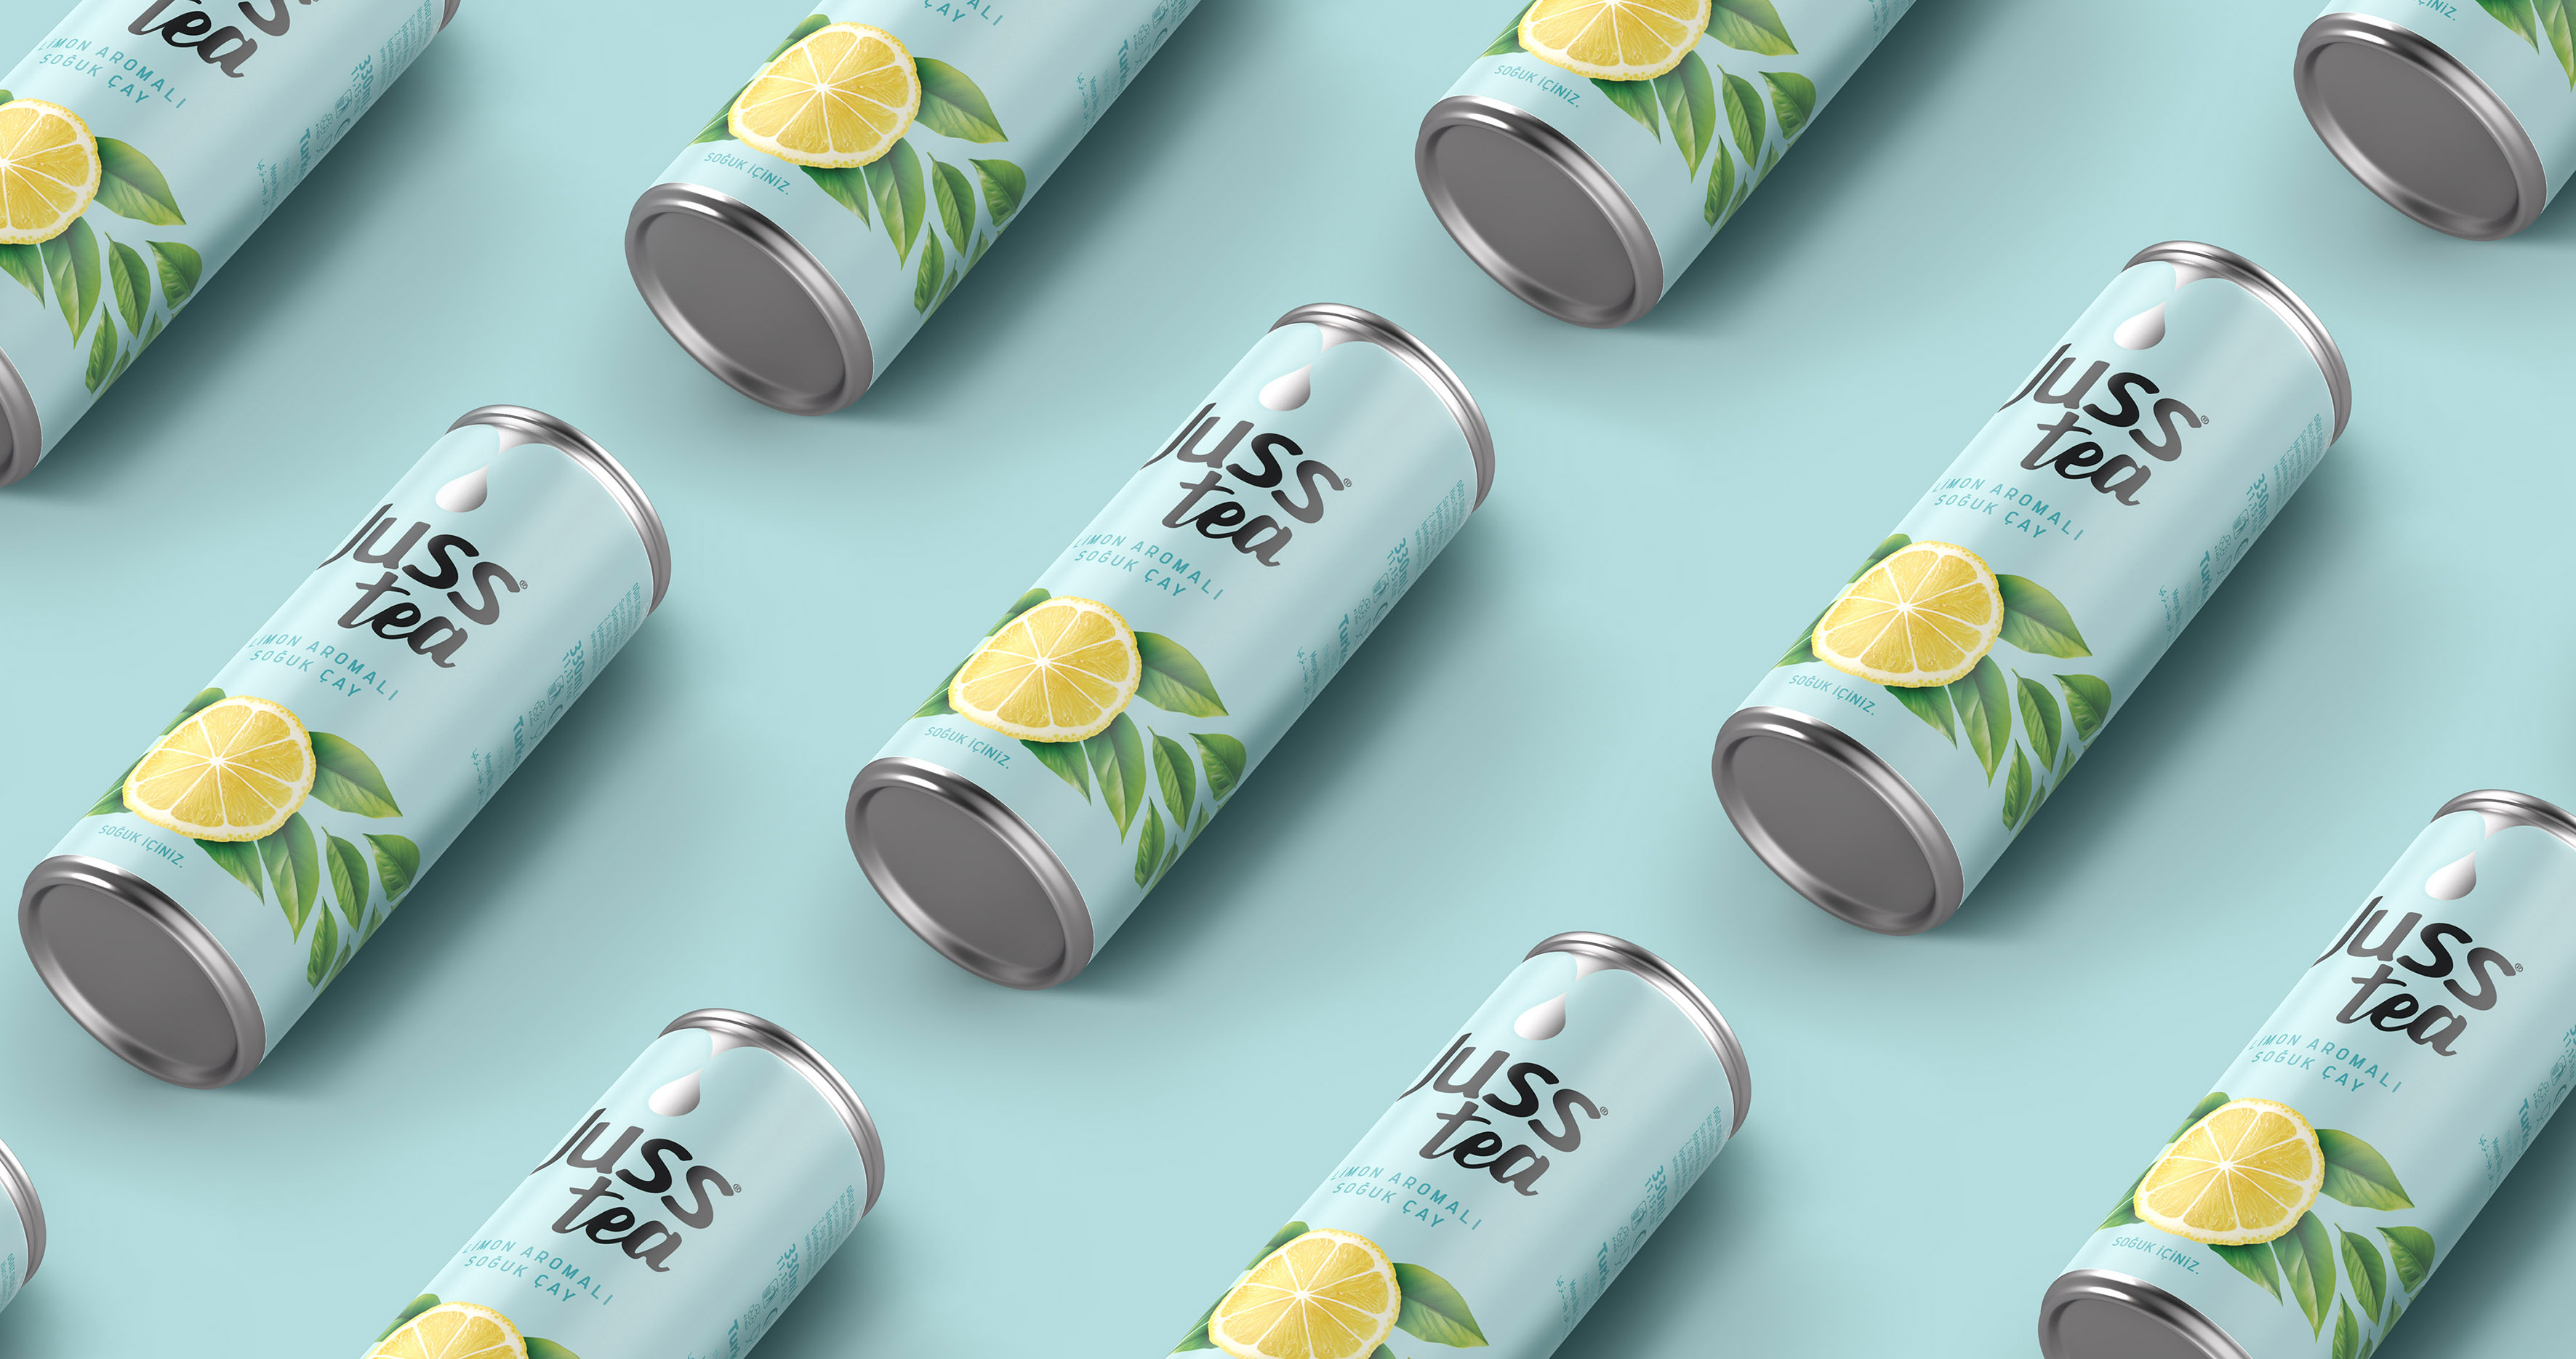 Tasarist, Elevates the Energy of Summer with Juss Tea Designs